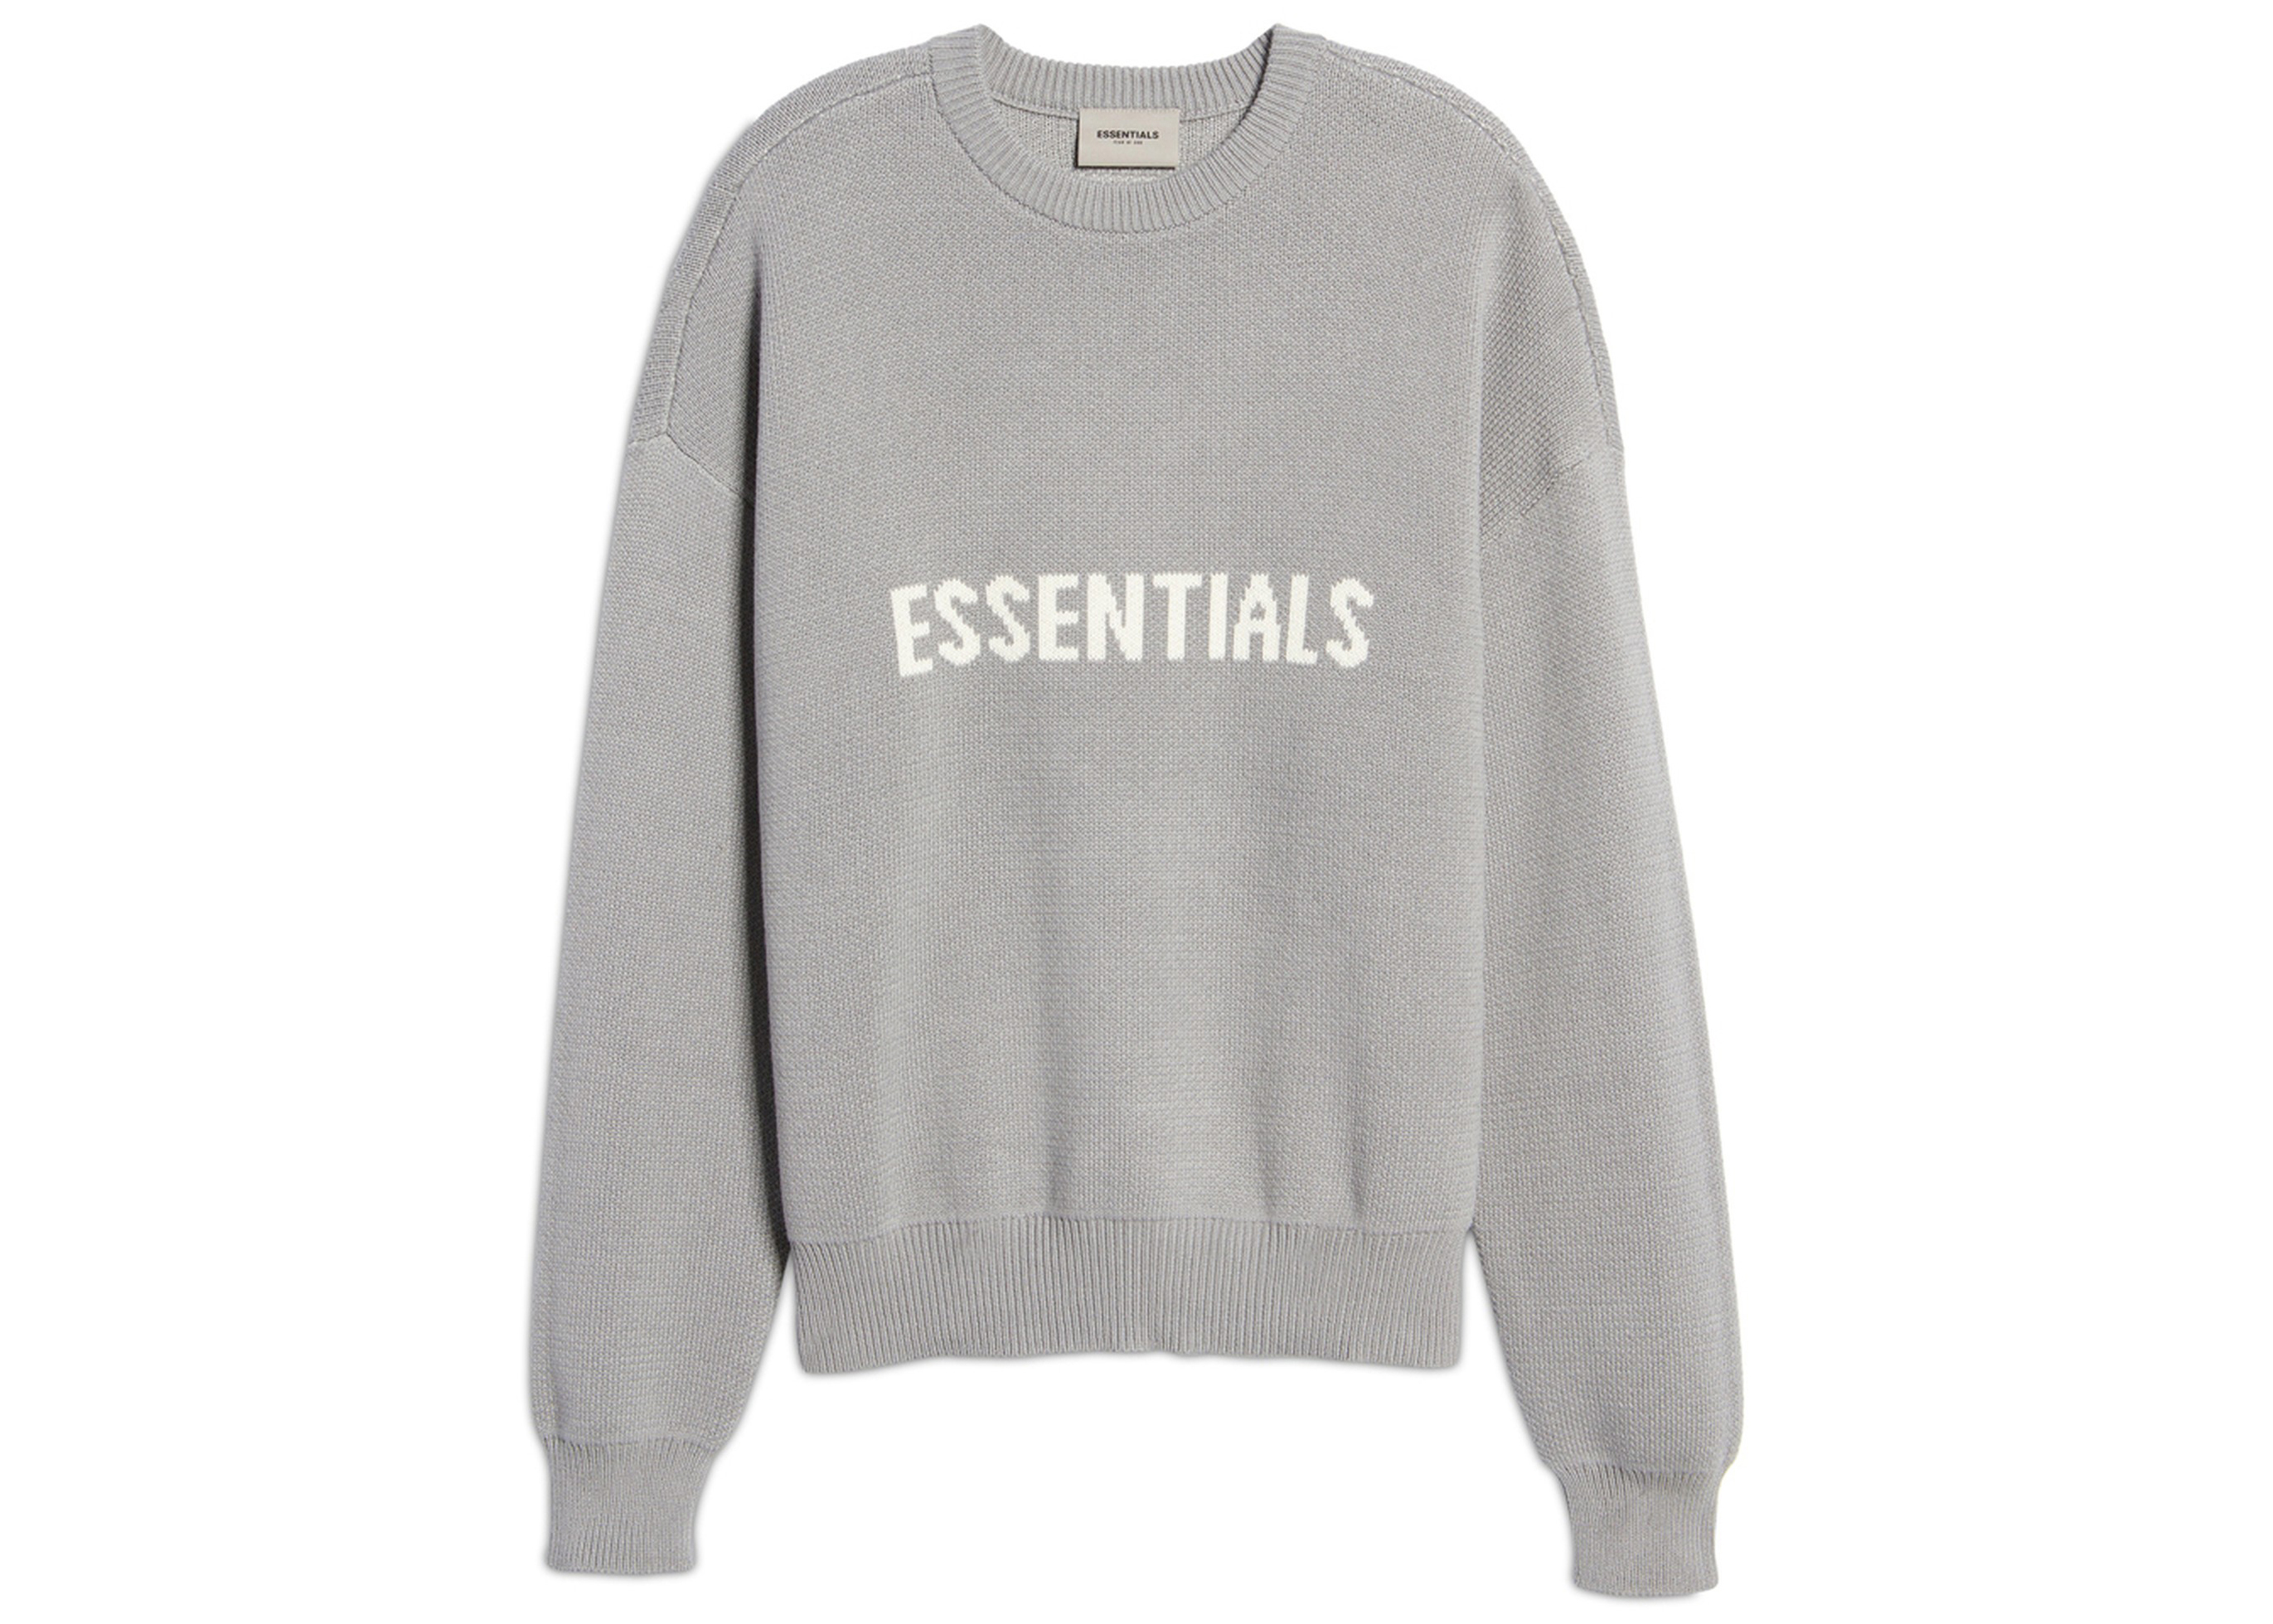 Fear of God Essentials Knit Sweater Cement/Pebble Men's - SS21 - US